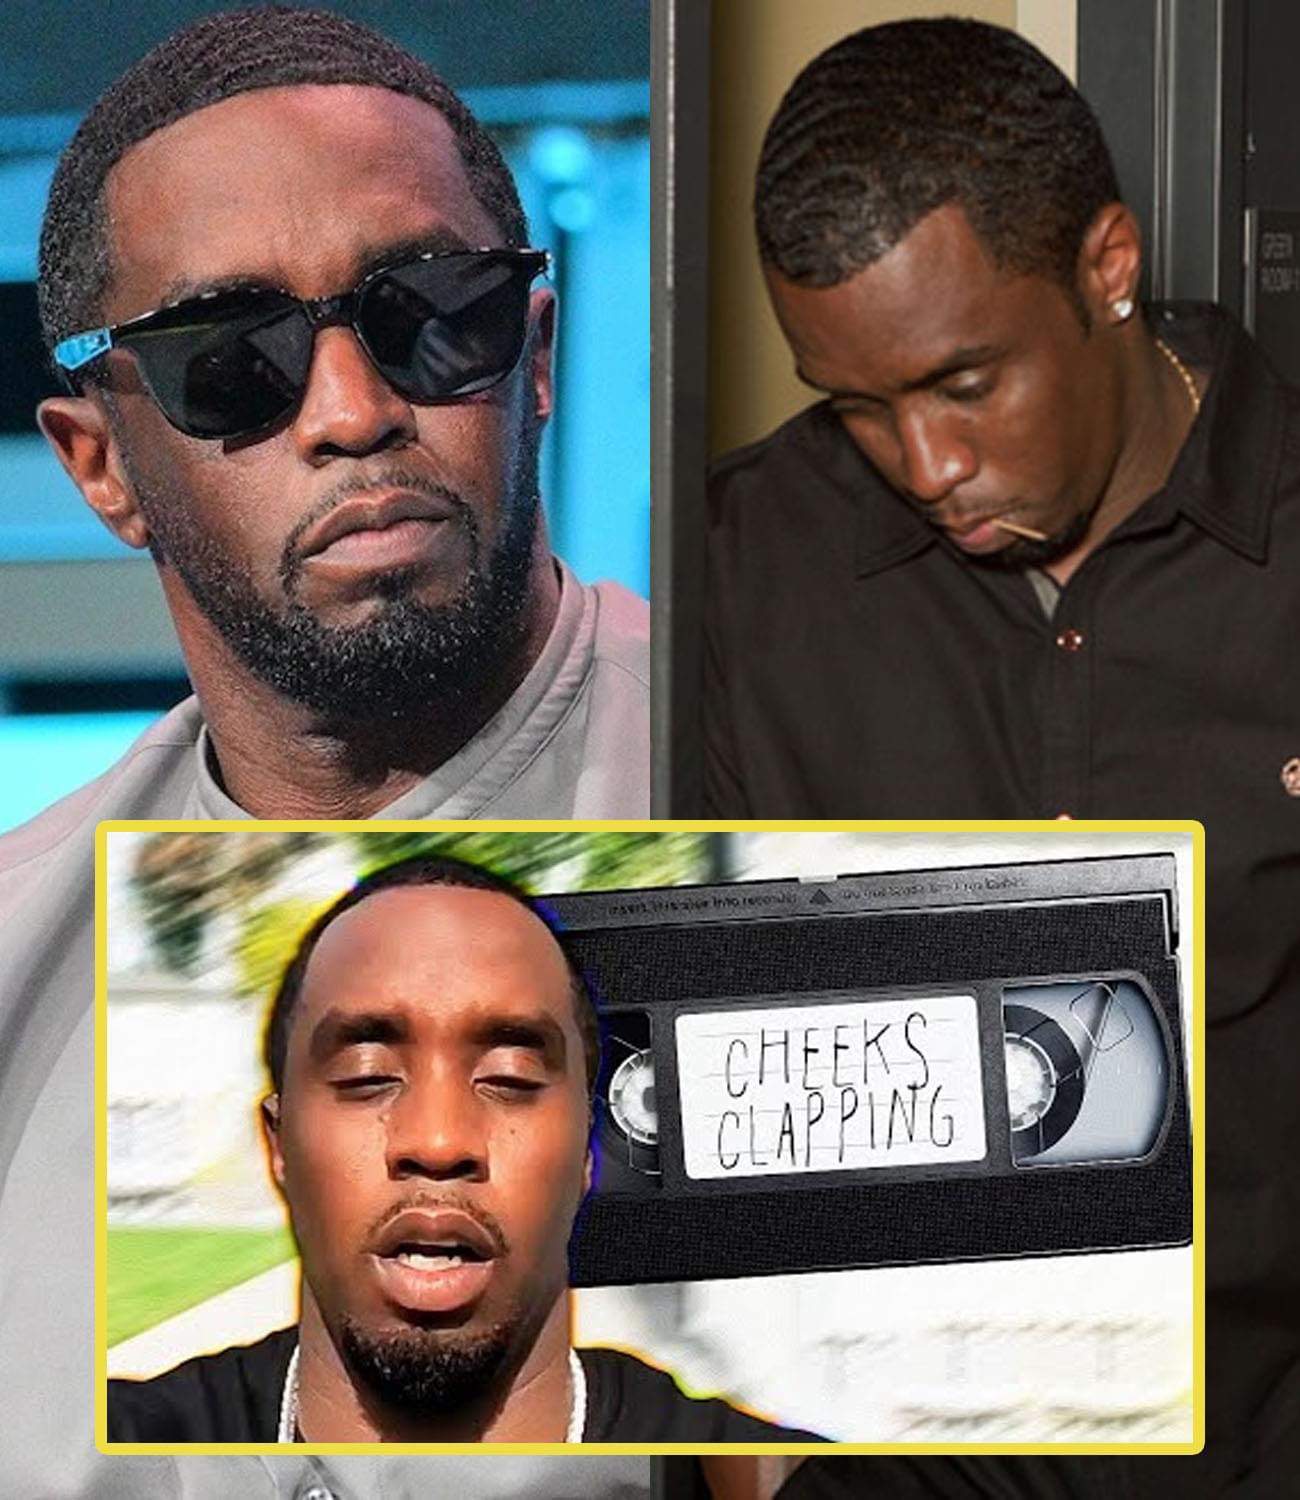 It’s Over Diddy: The Feds Found THIS on Those Cheek Clapping Tapes